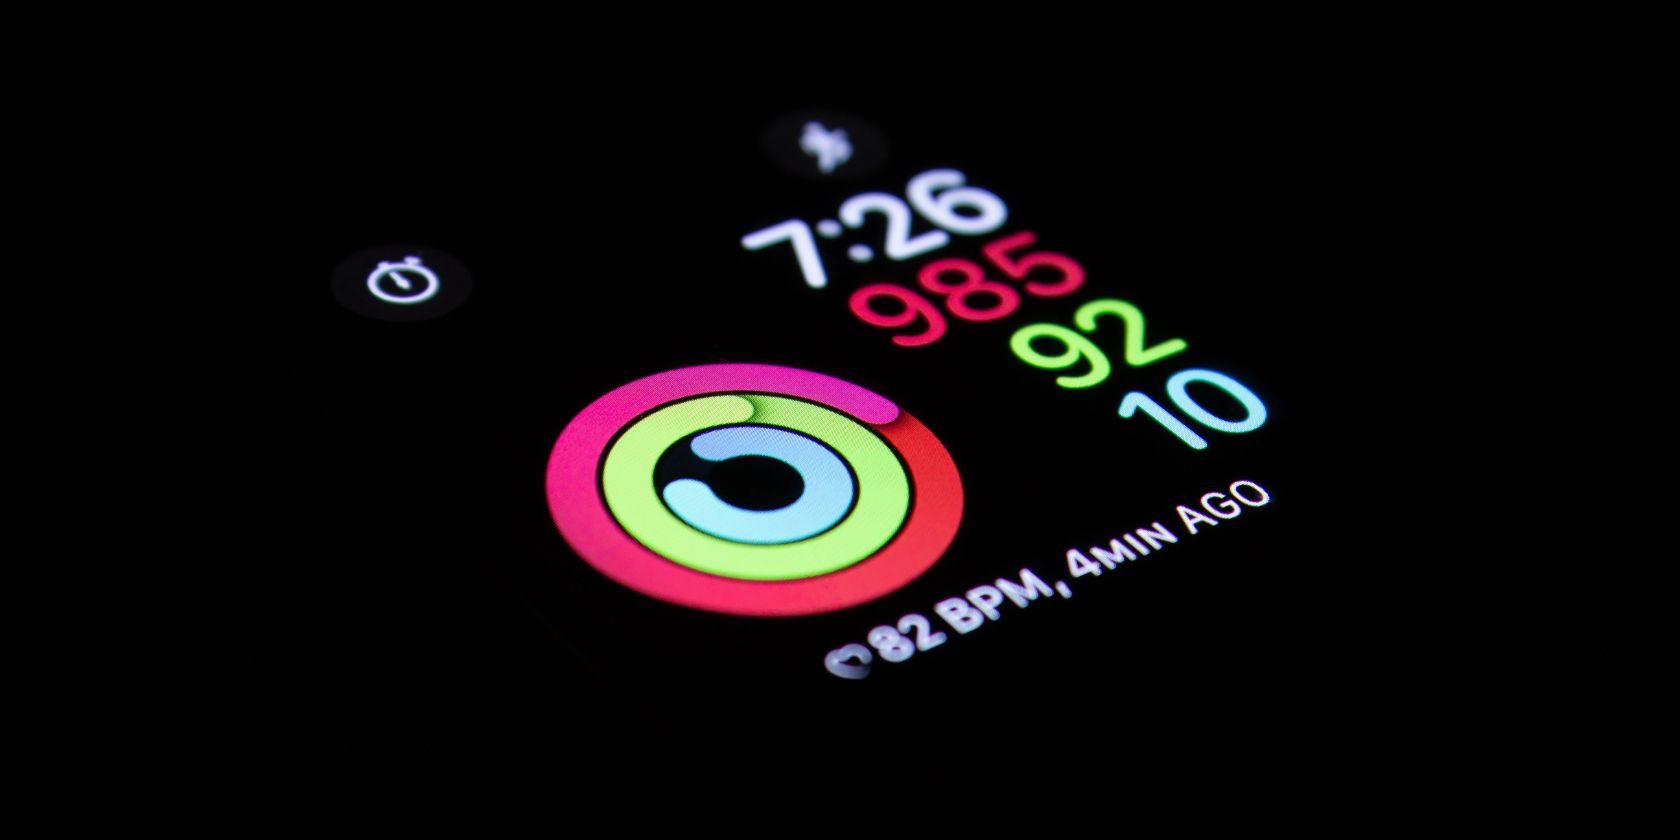 Display of a fitness watch with progress rings